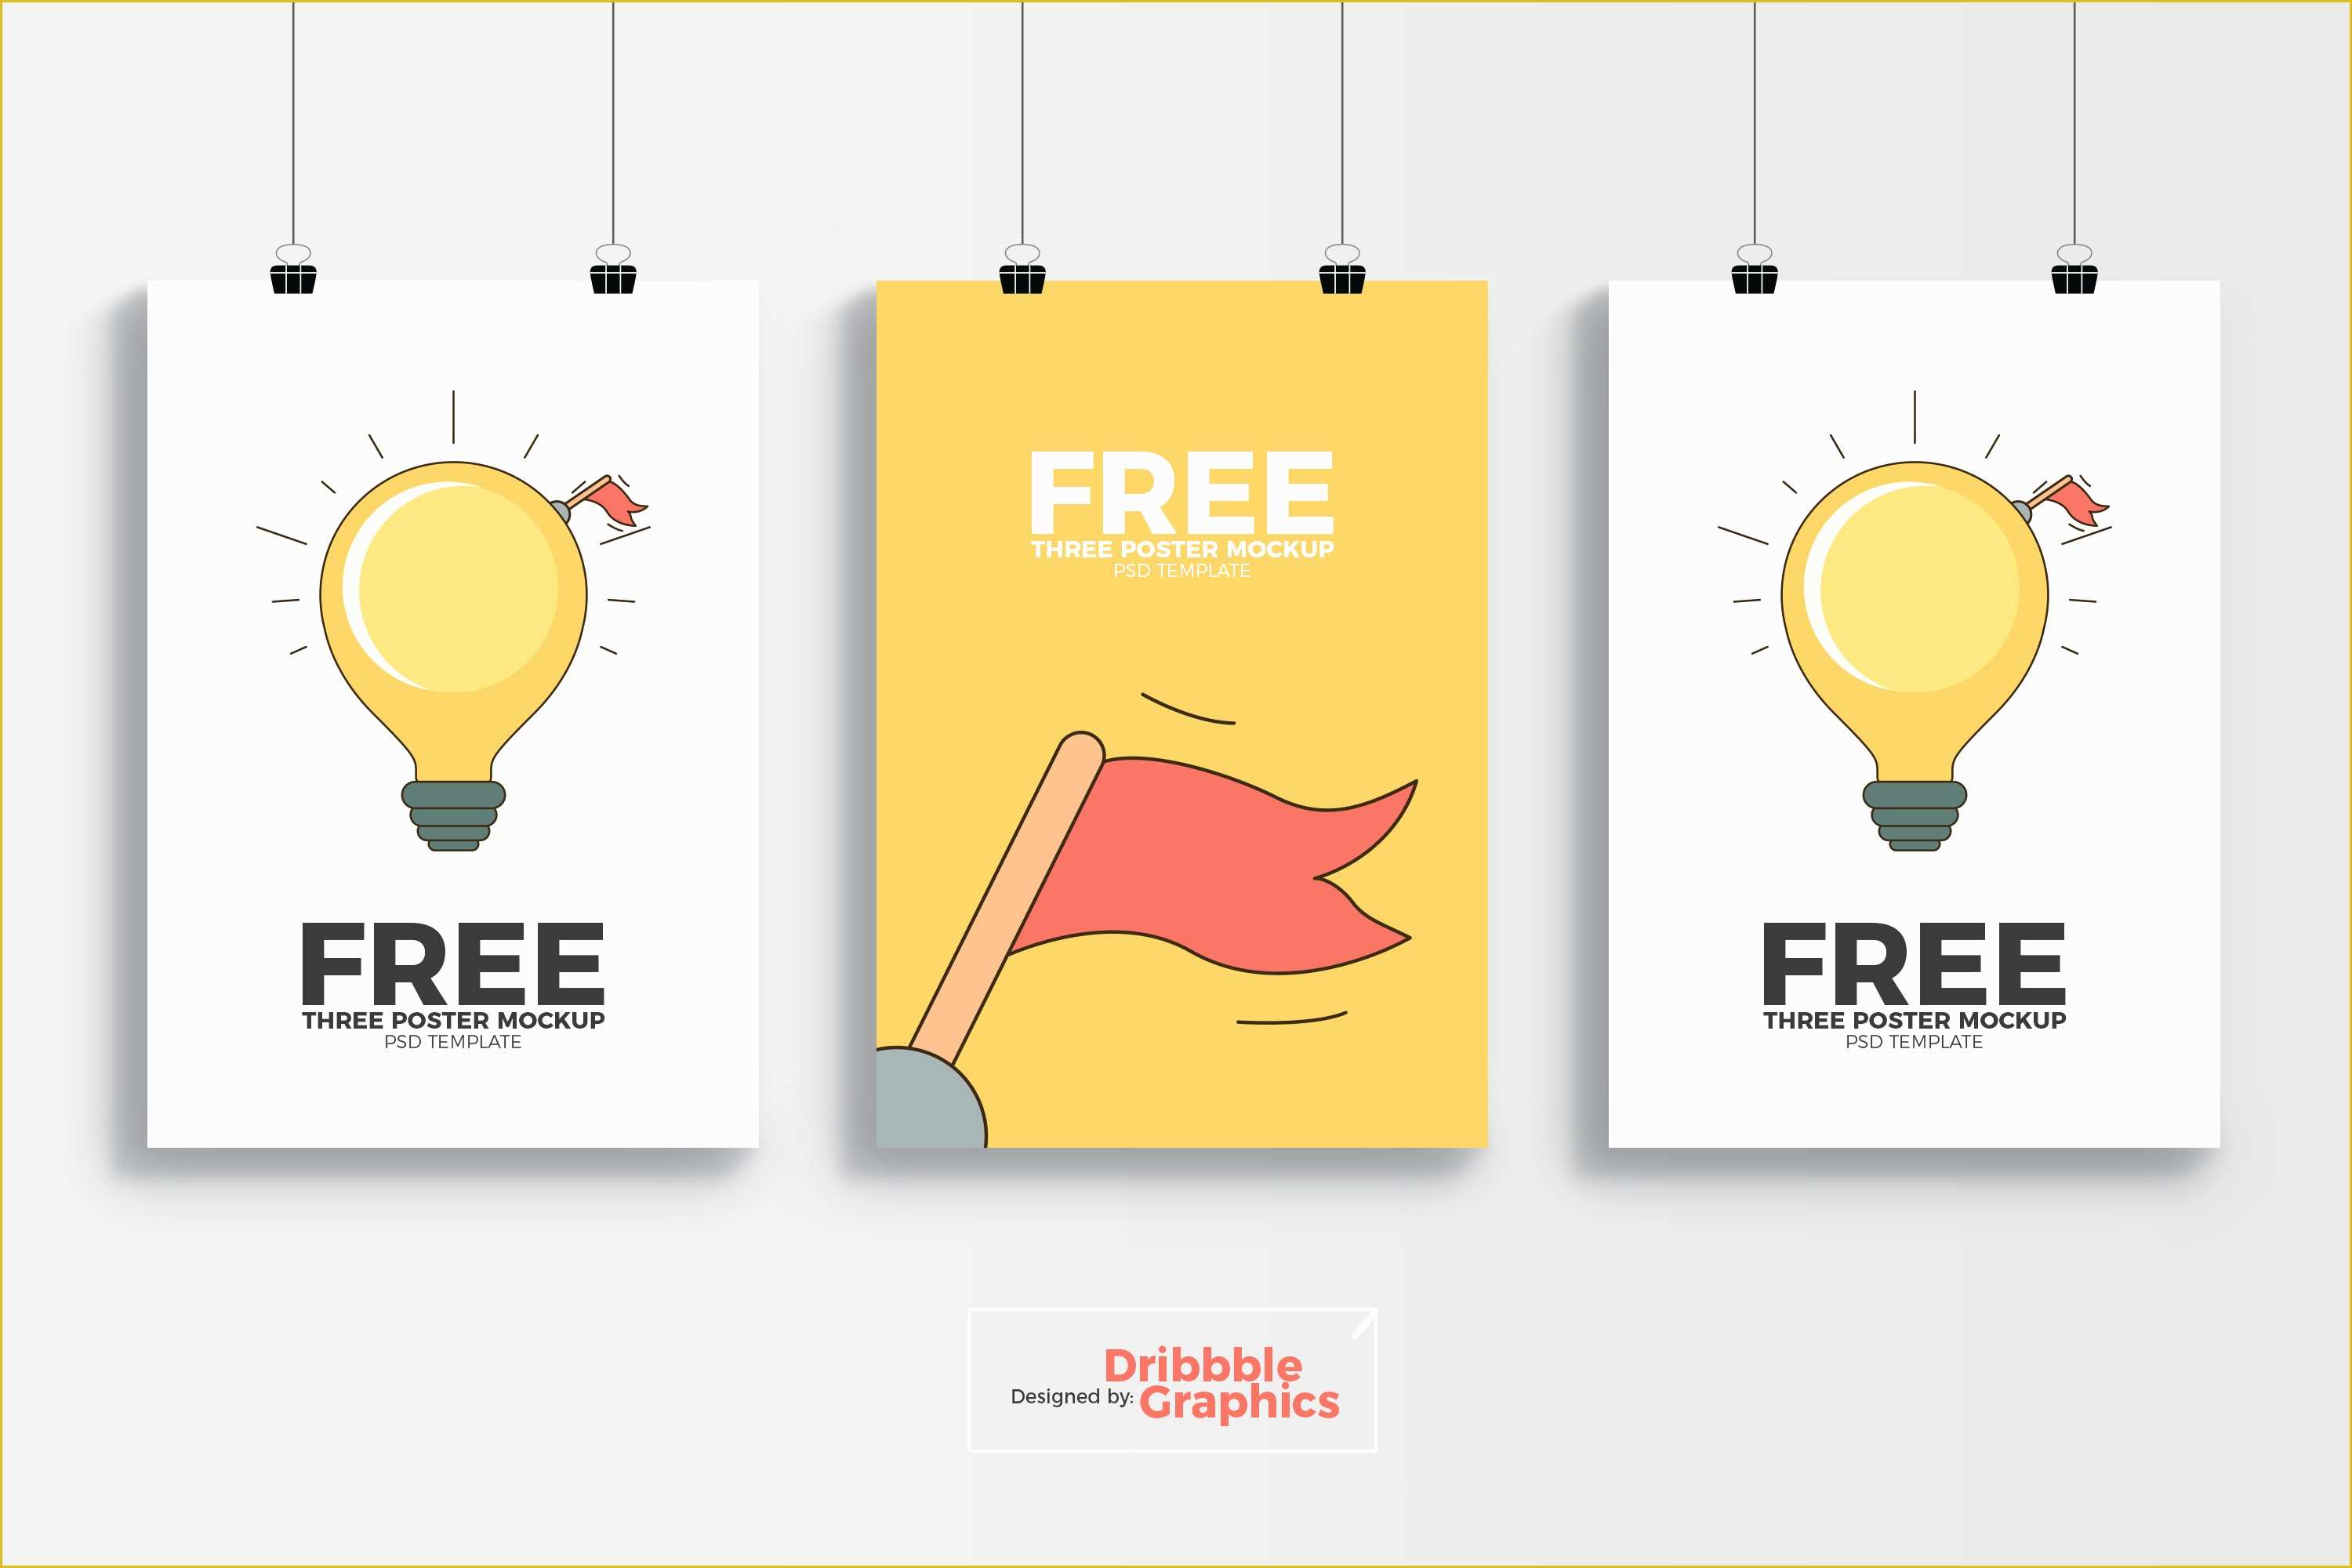 Free Mockup Templates Of Free 3 Poster Mockup Psd Template